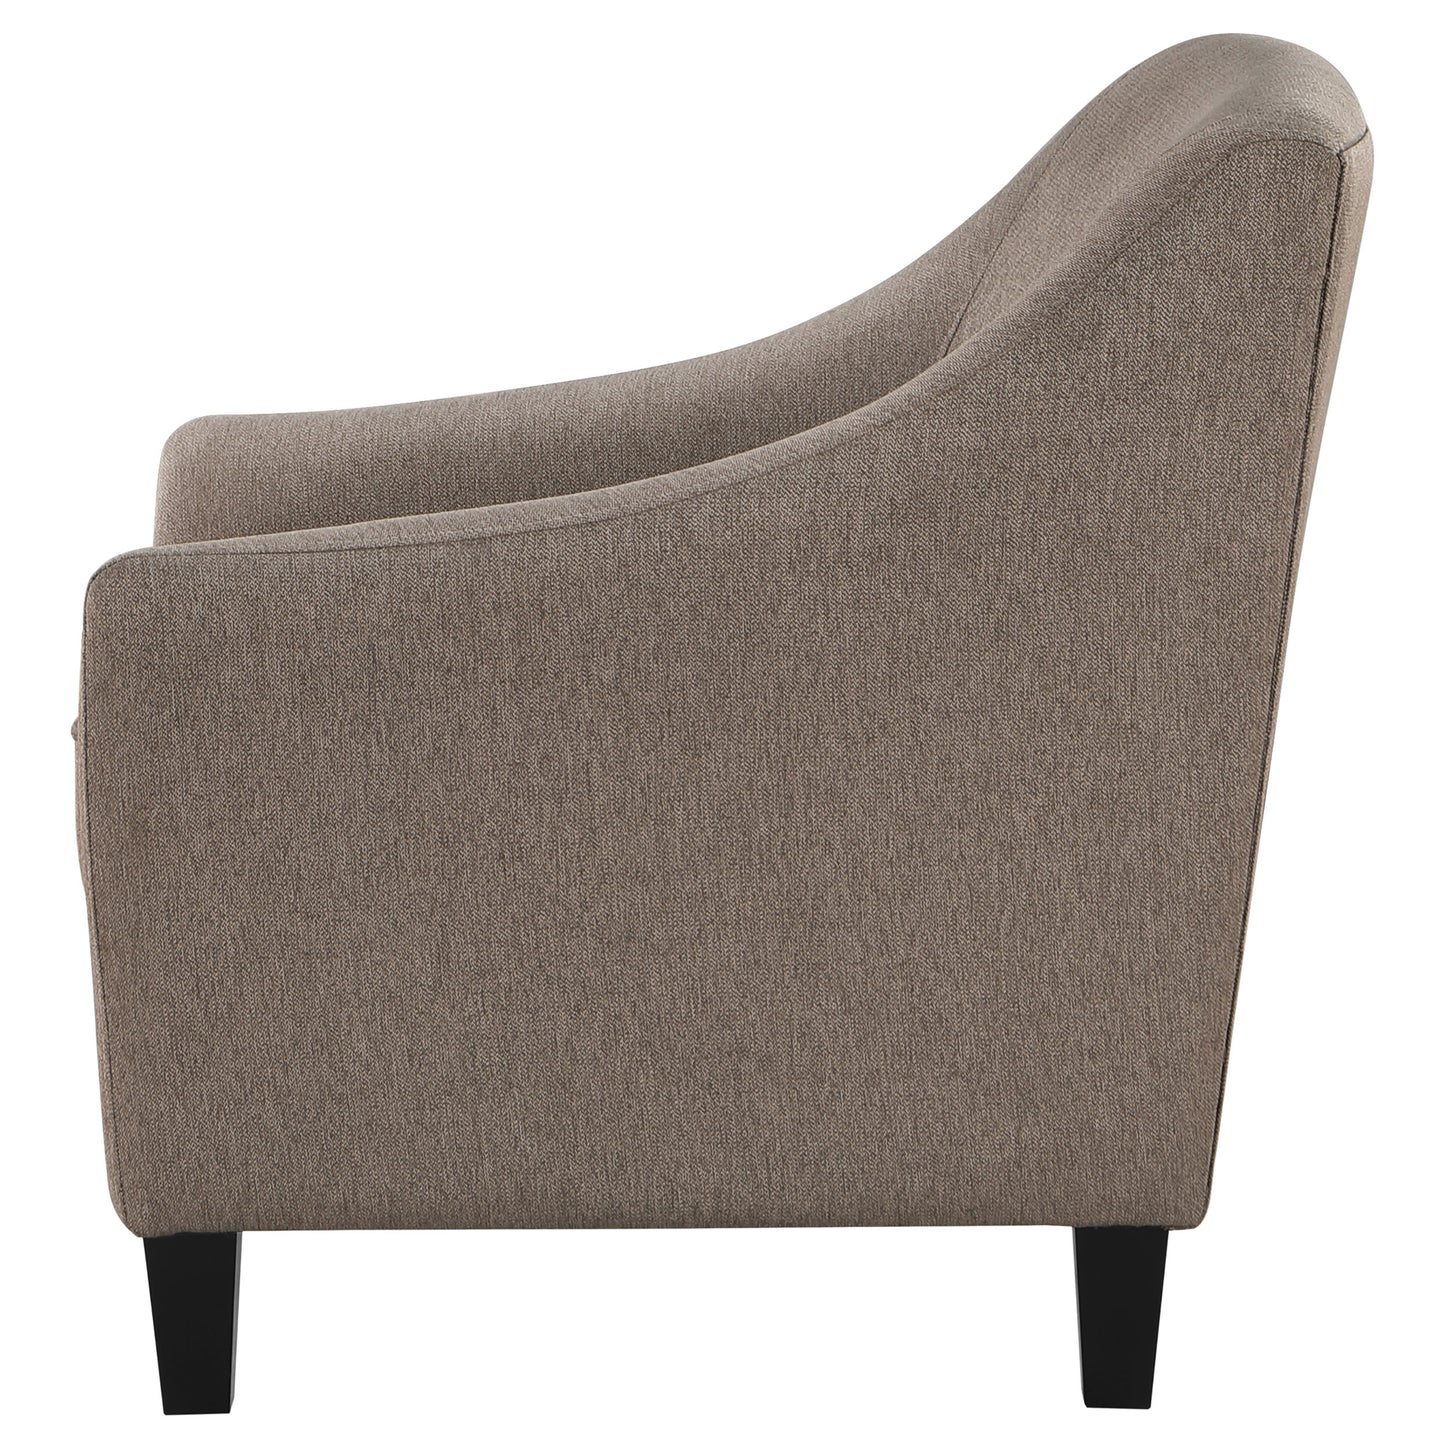 Liam Upholstered Sloped Arm Accent Club Chair Camel